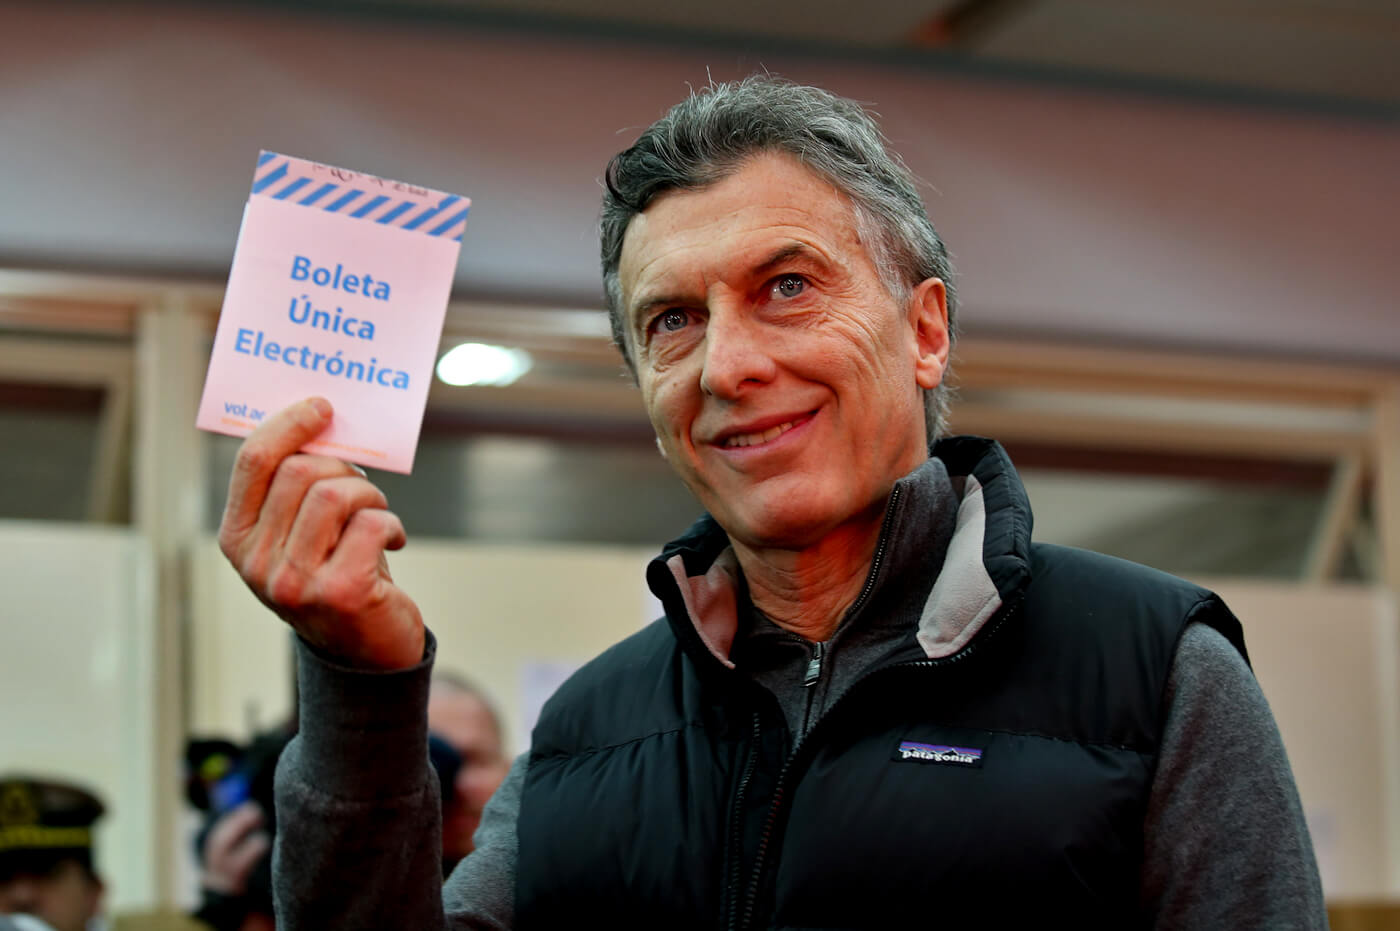 Mauricio Macri holds up a ballot which reads in Spanish “Unique Electronic Ballot” during mayoral elections in Buenos Aires, Argentina, July 5, 2015. Daniel Jayo | AP